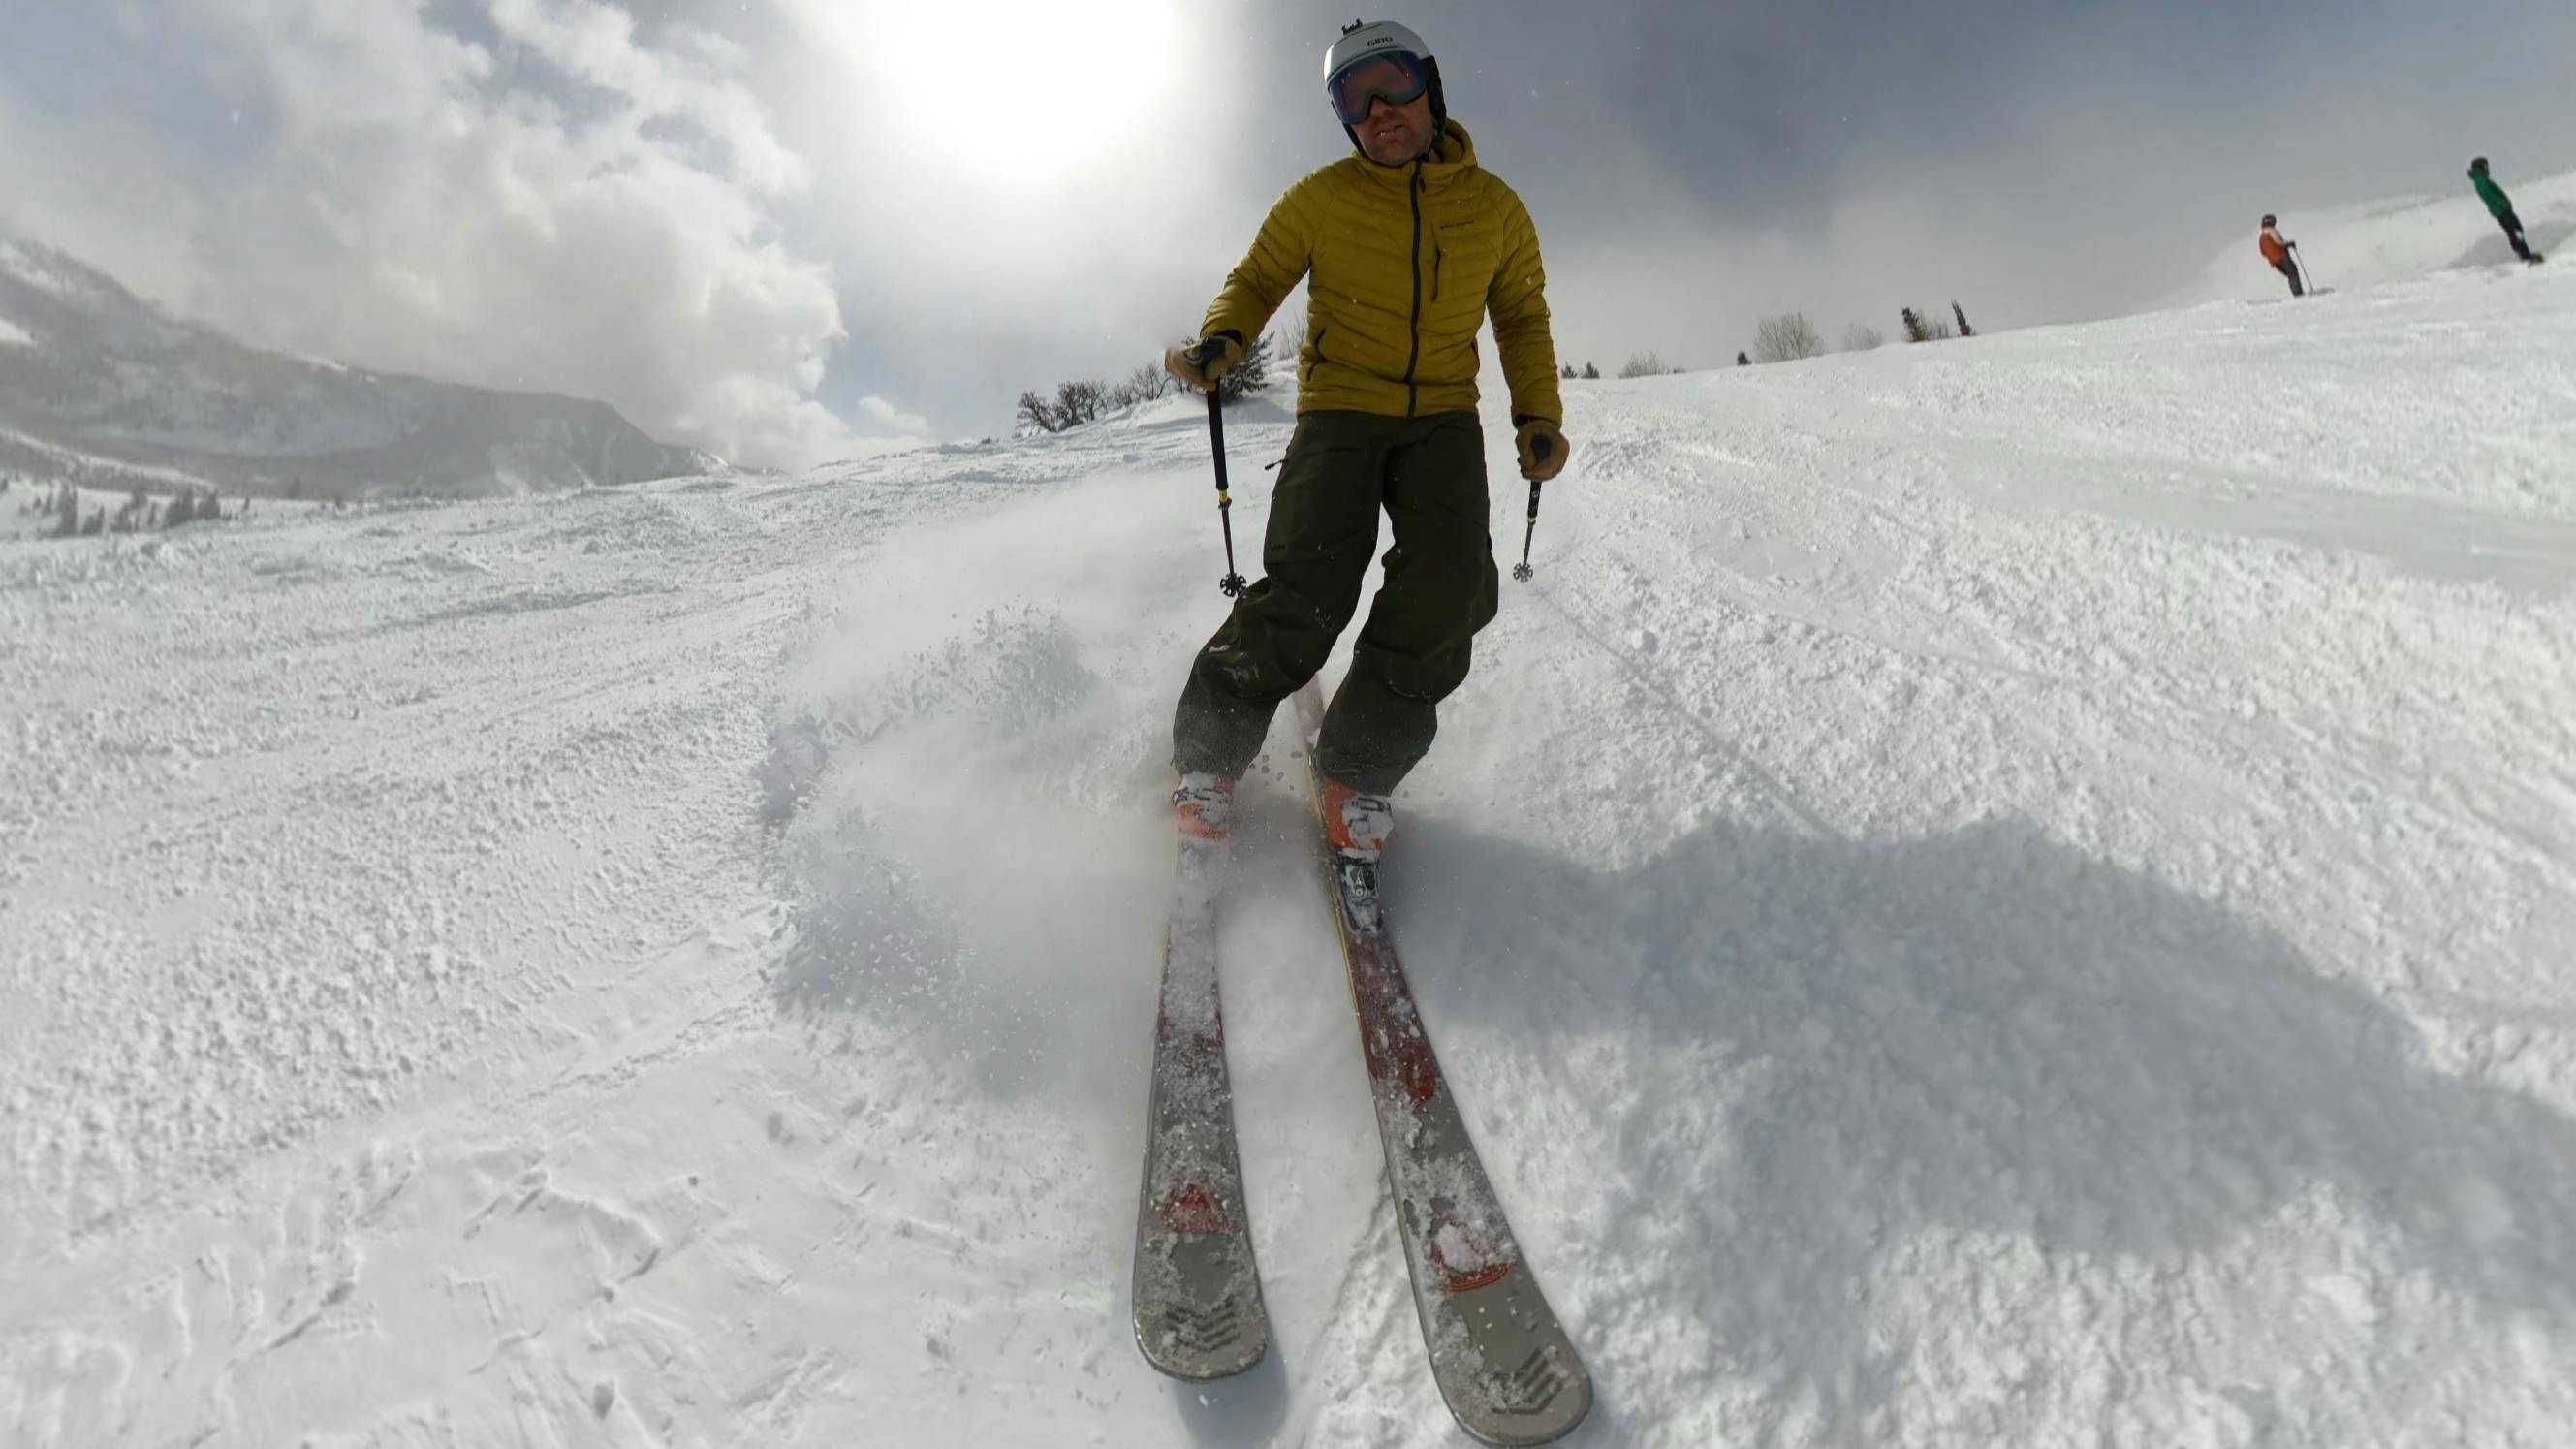 A skier on the Rossignol Experience 76 Skis. 